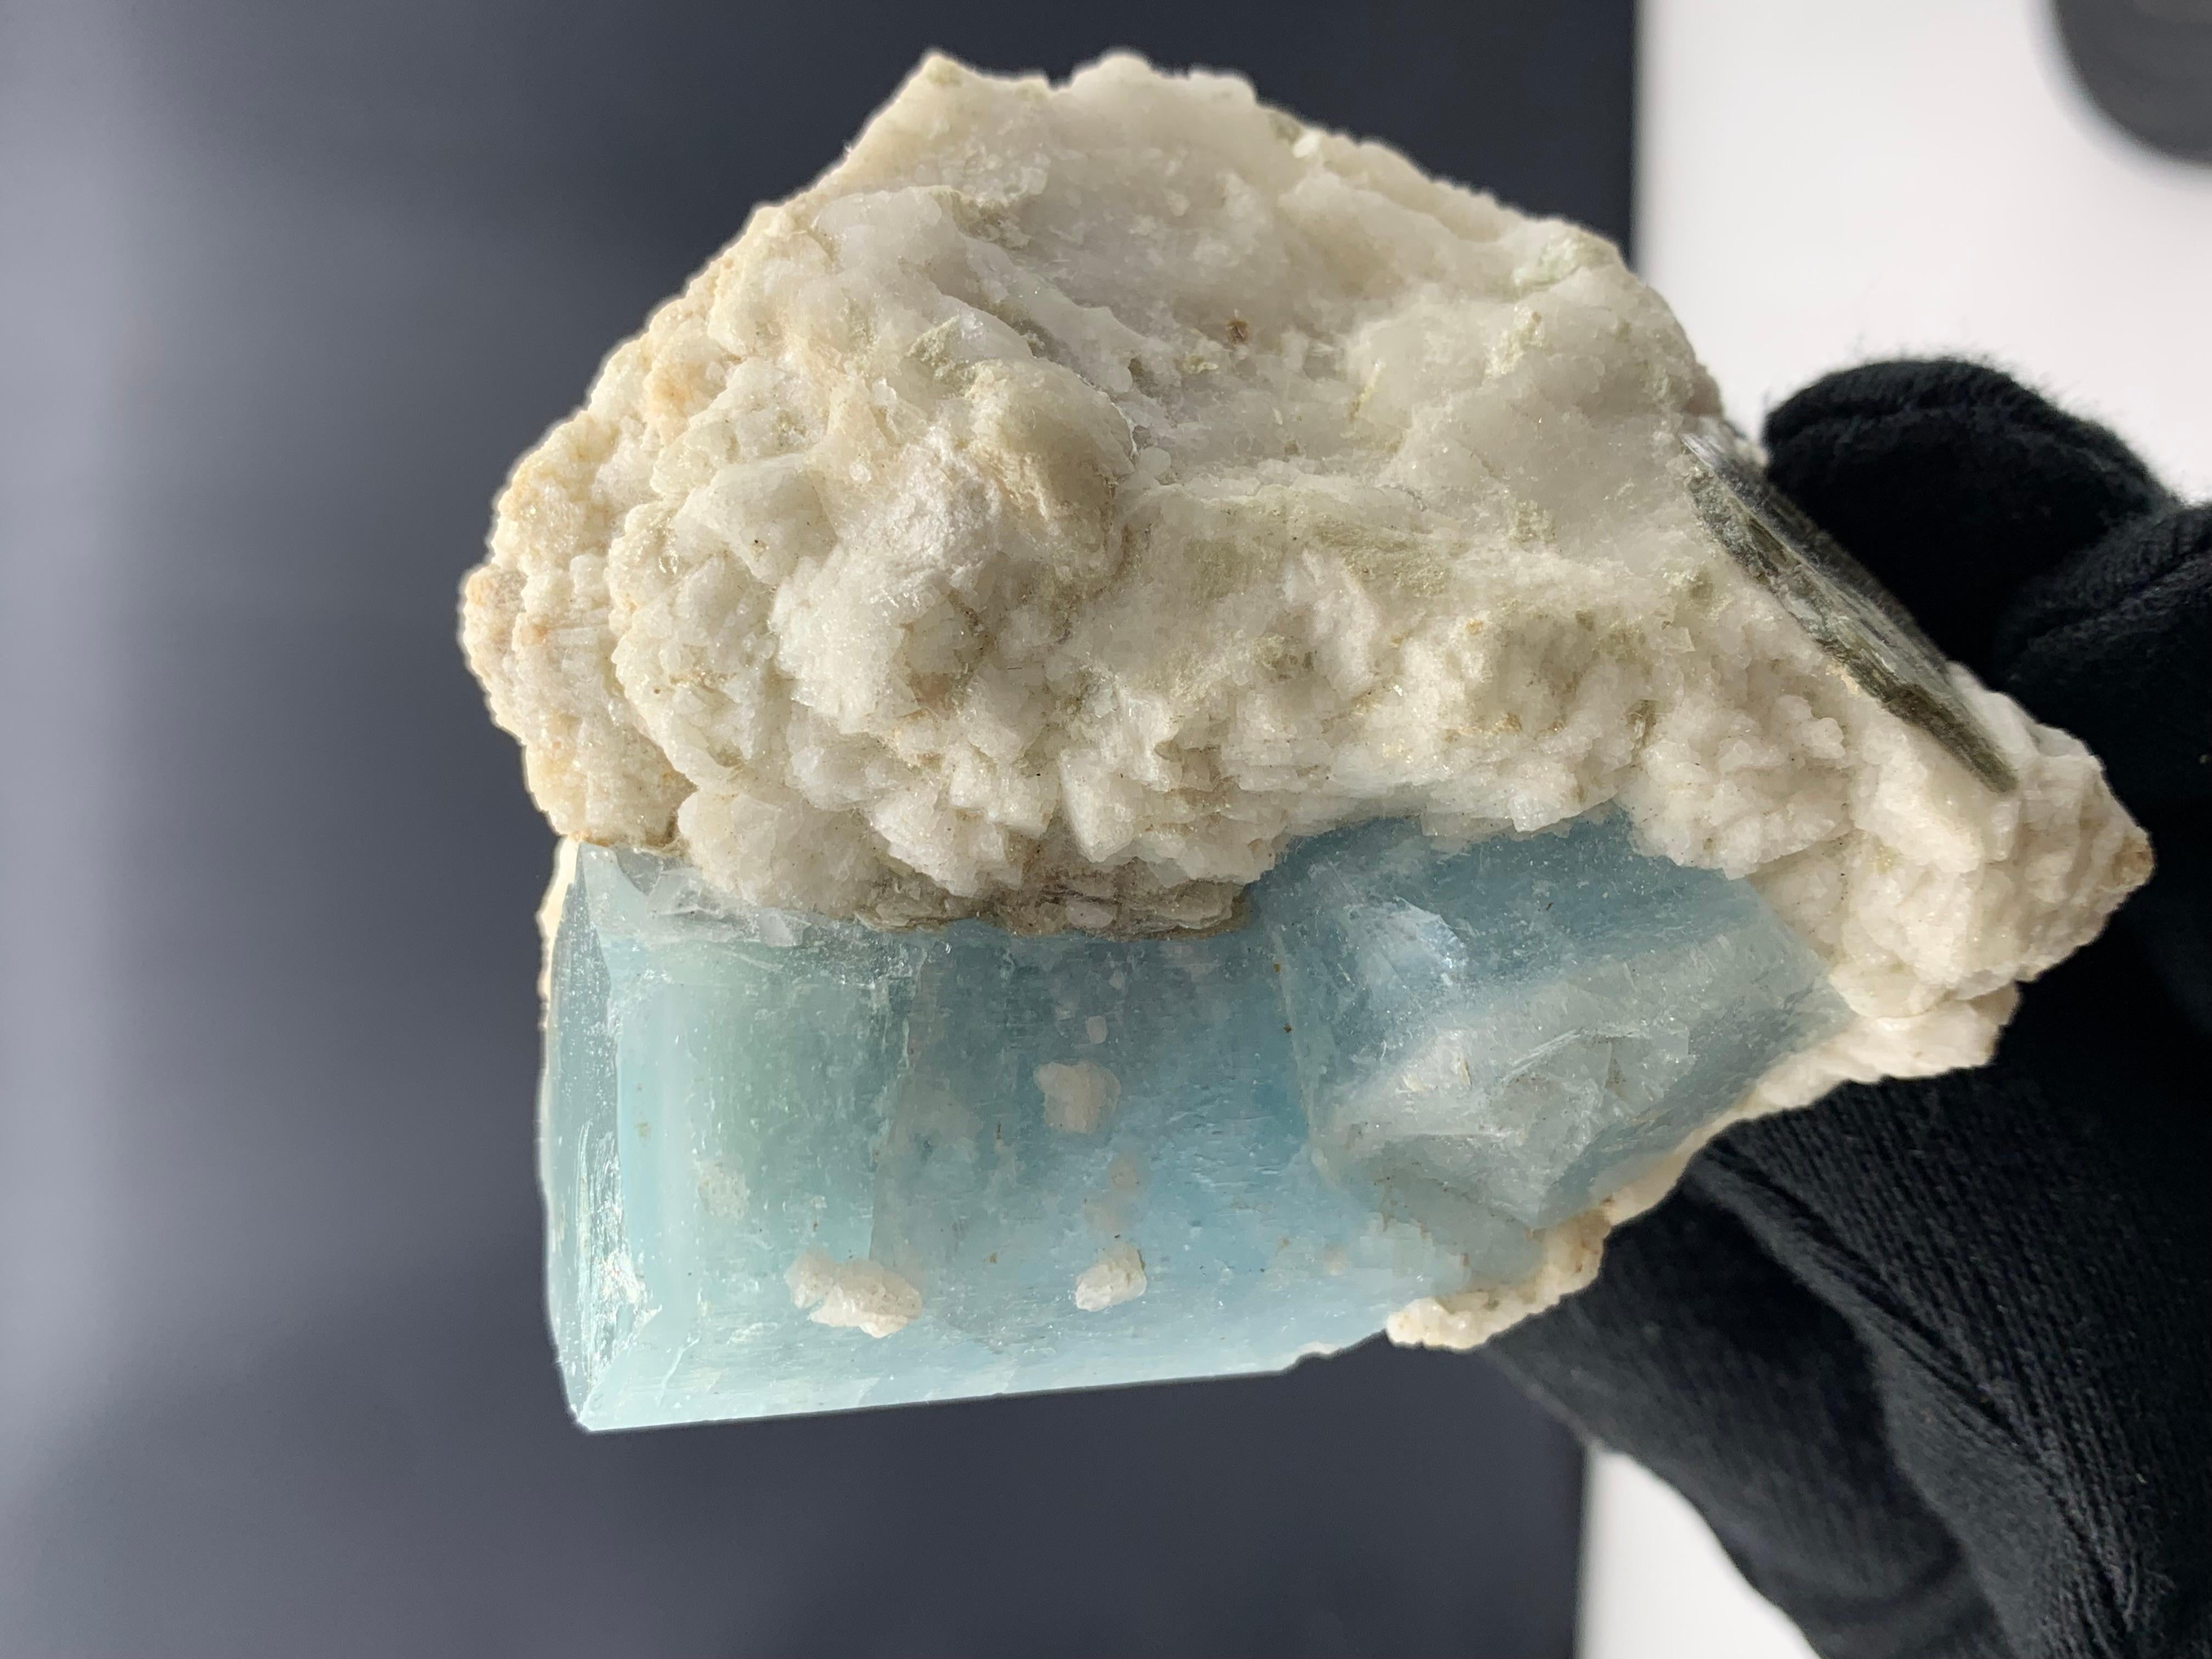 Weight: 207.32 Gram
Dimension: 8.2 x 6.7 x 3.2 Cm
Origin: Afghanistan 

Aquamarine is a pale-blue to light-green variety of beryl. The color of aquamarine can be changed by heat. Aquamarine has a chemical composition of Be₃Al₂Si₆O₁₈, also containing